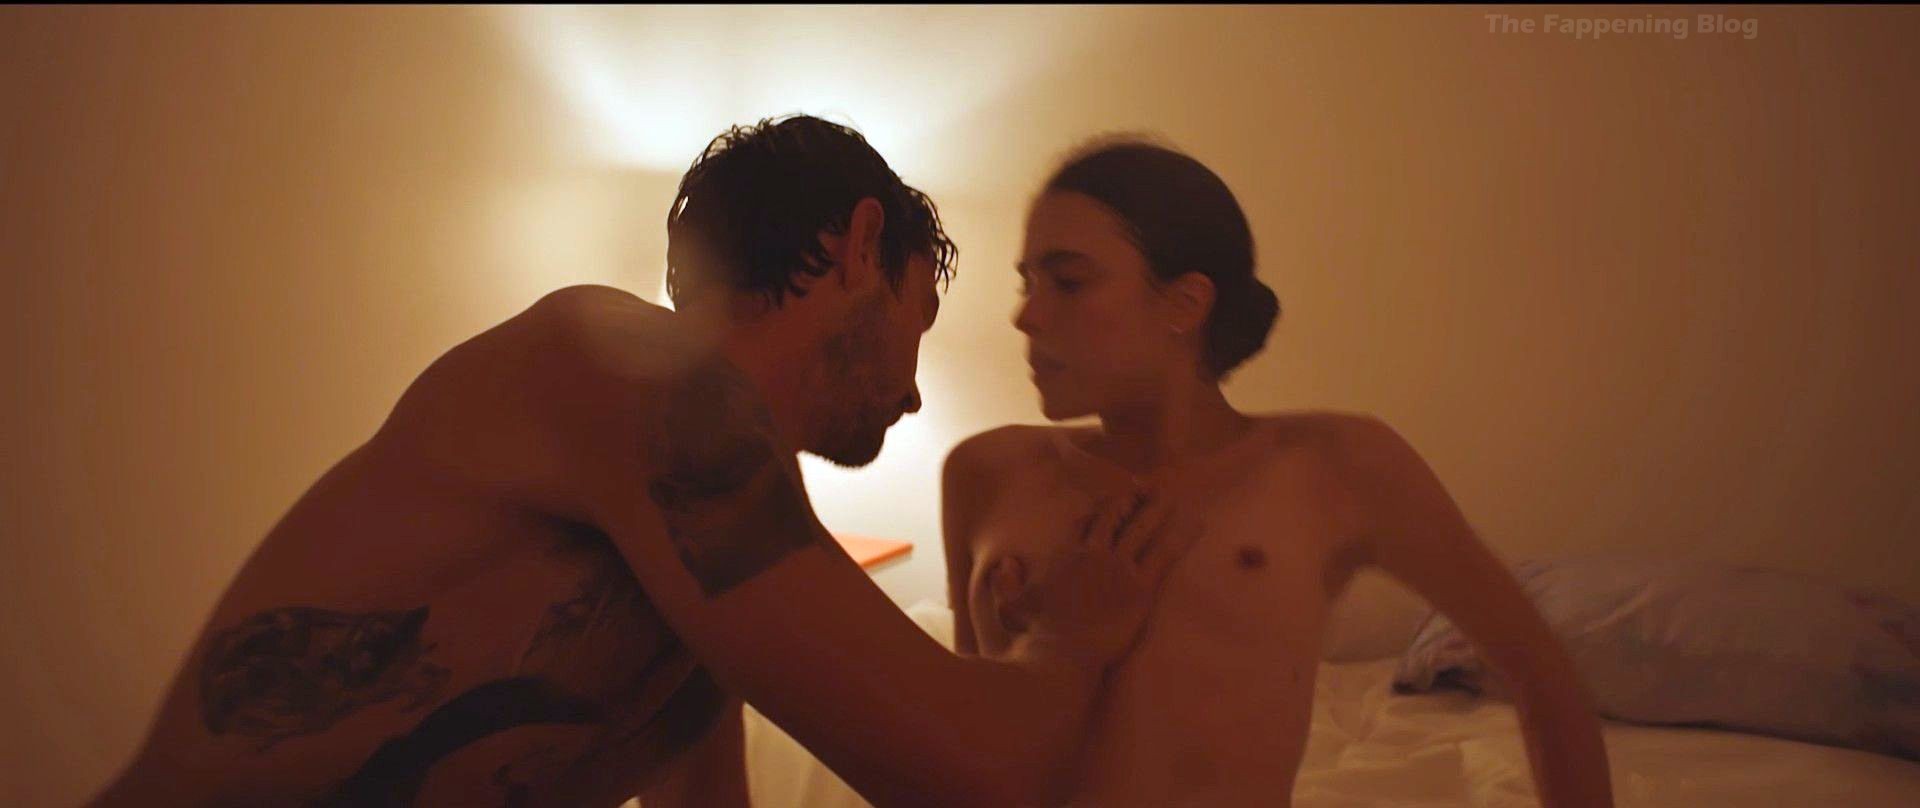 Watch Margaret Qualley’s nude video from the music video "Love Me Like...